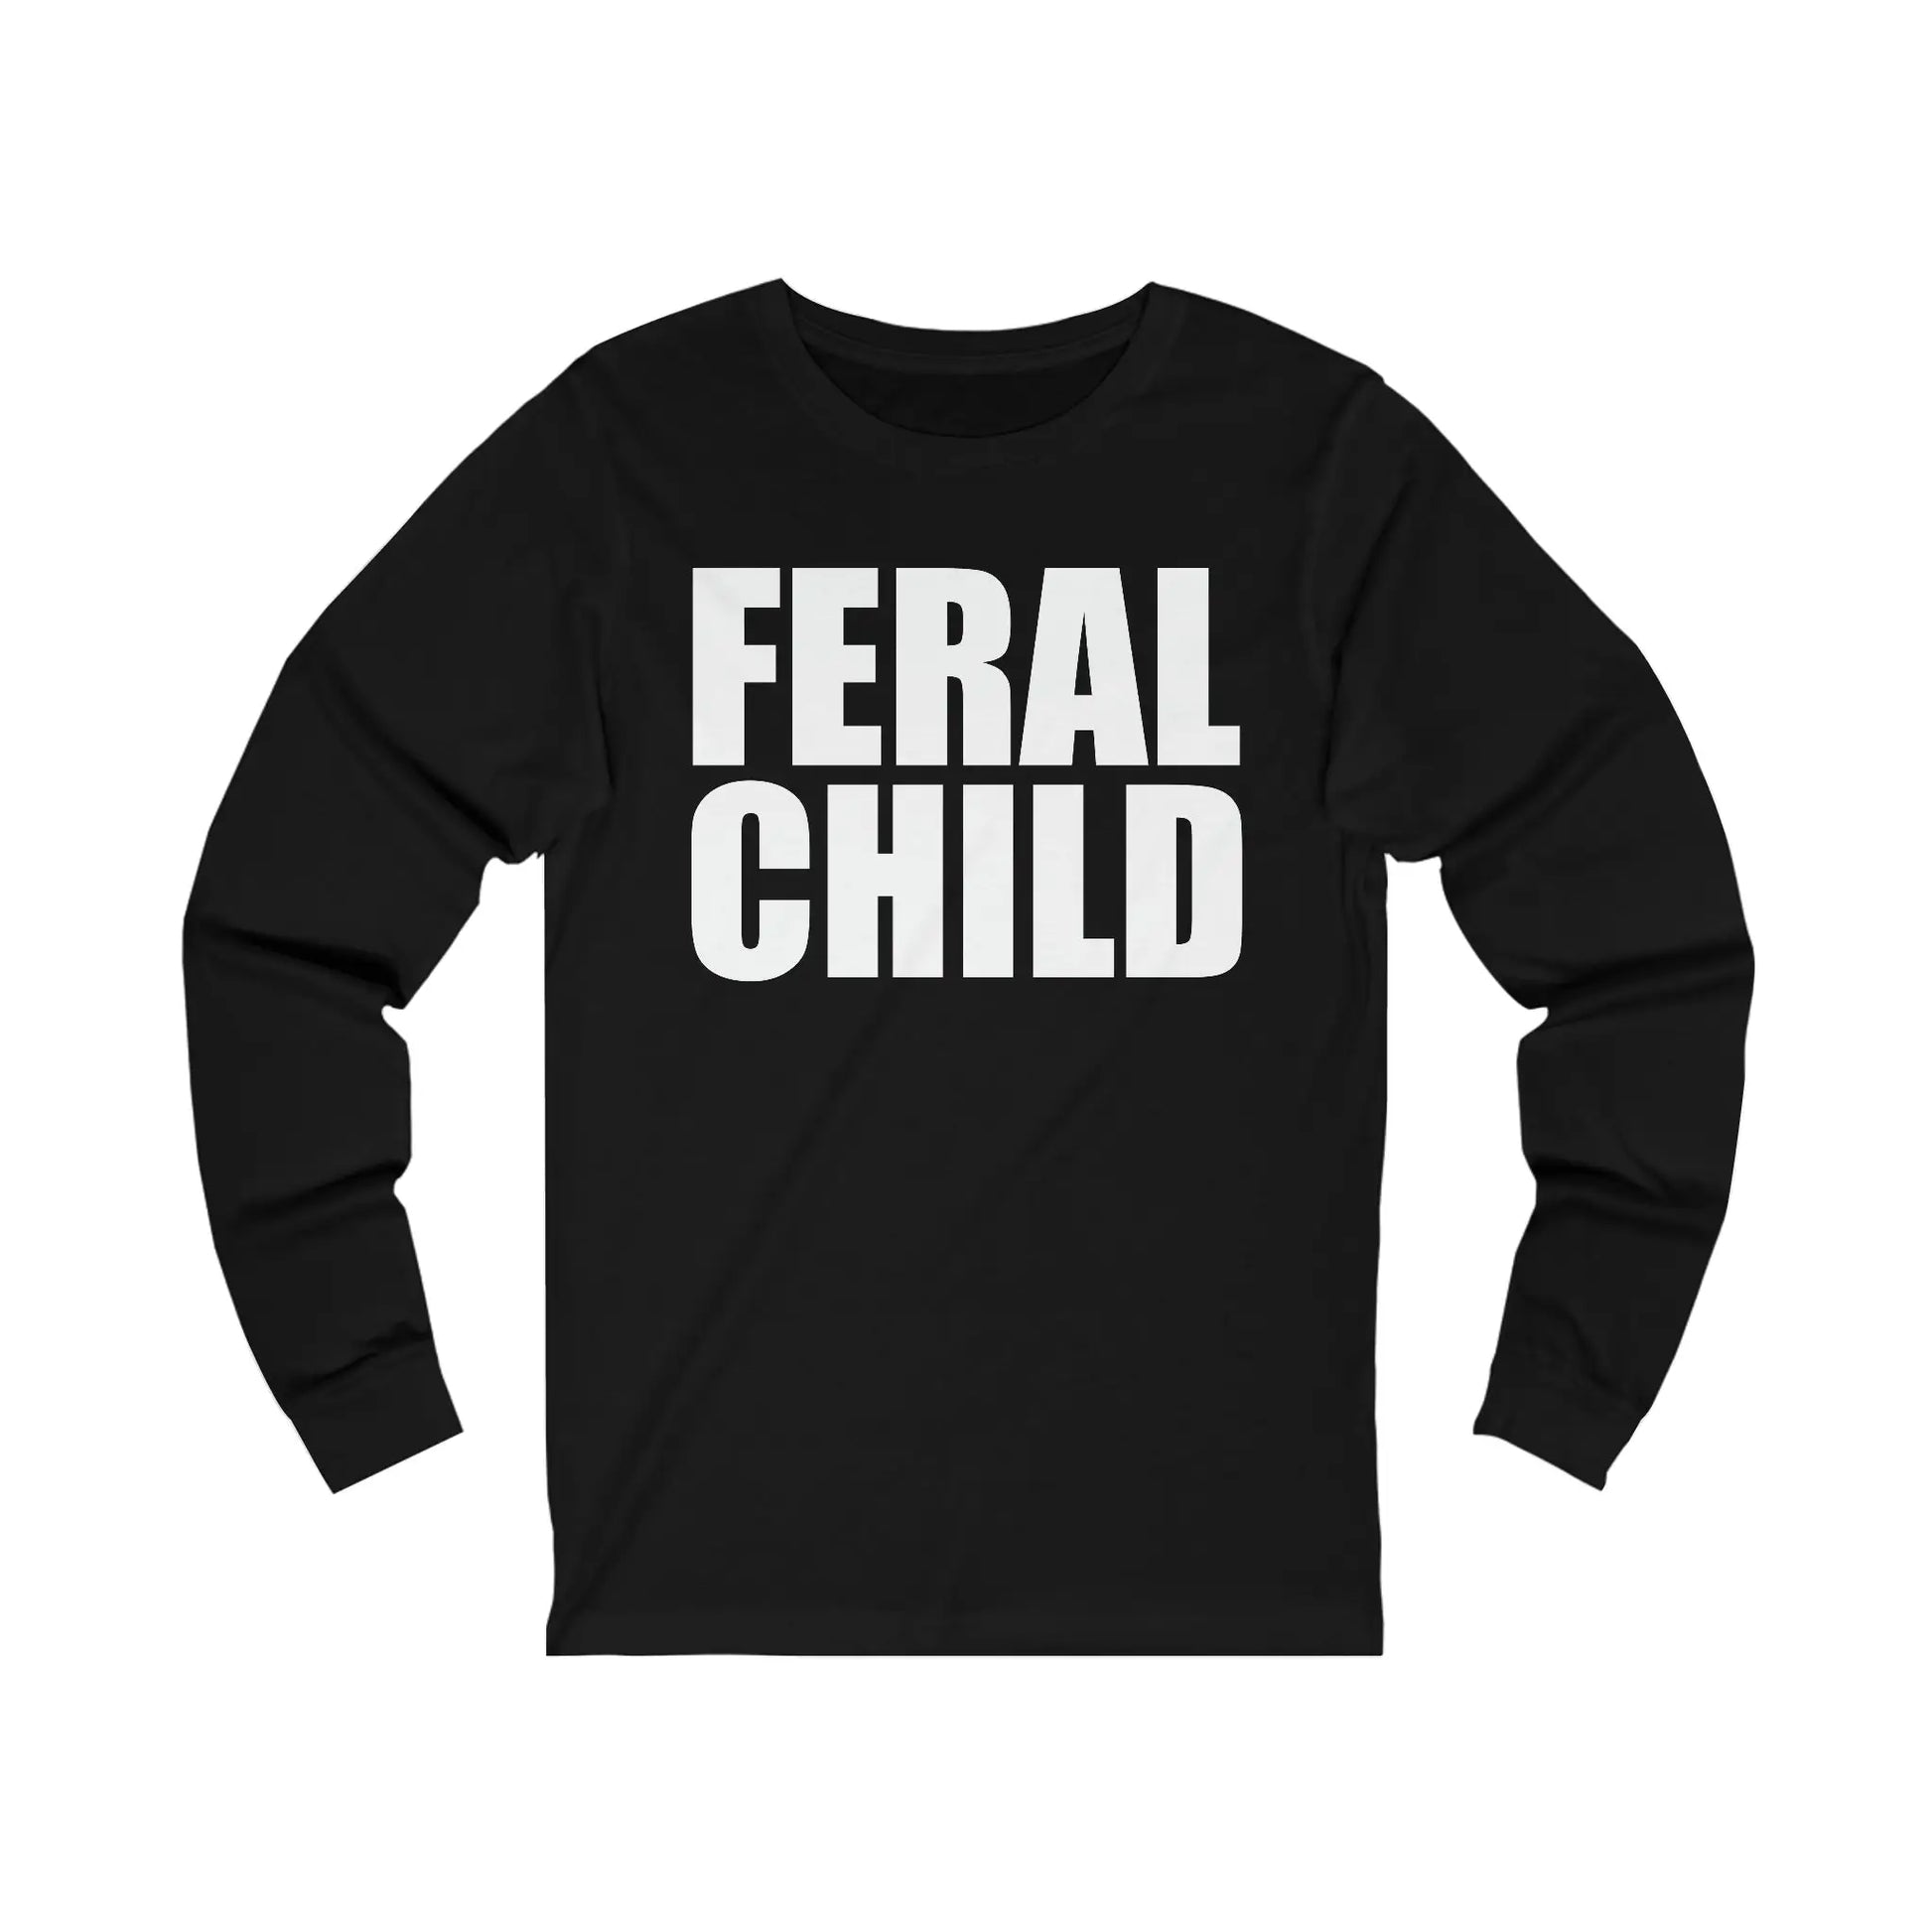 Feral Child Men's Jersey Long Sleeve Tee - Wicked Tees